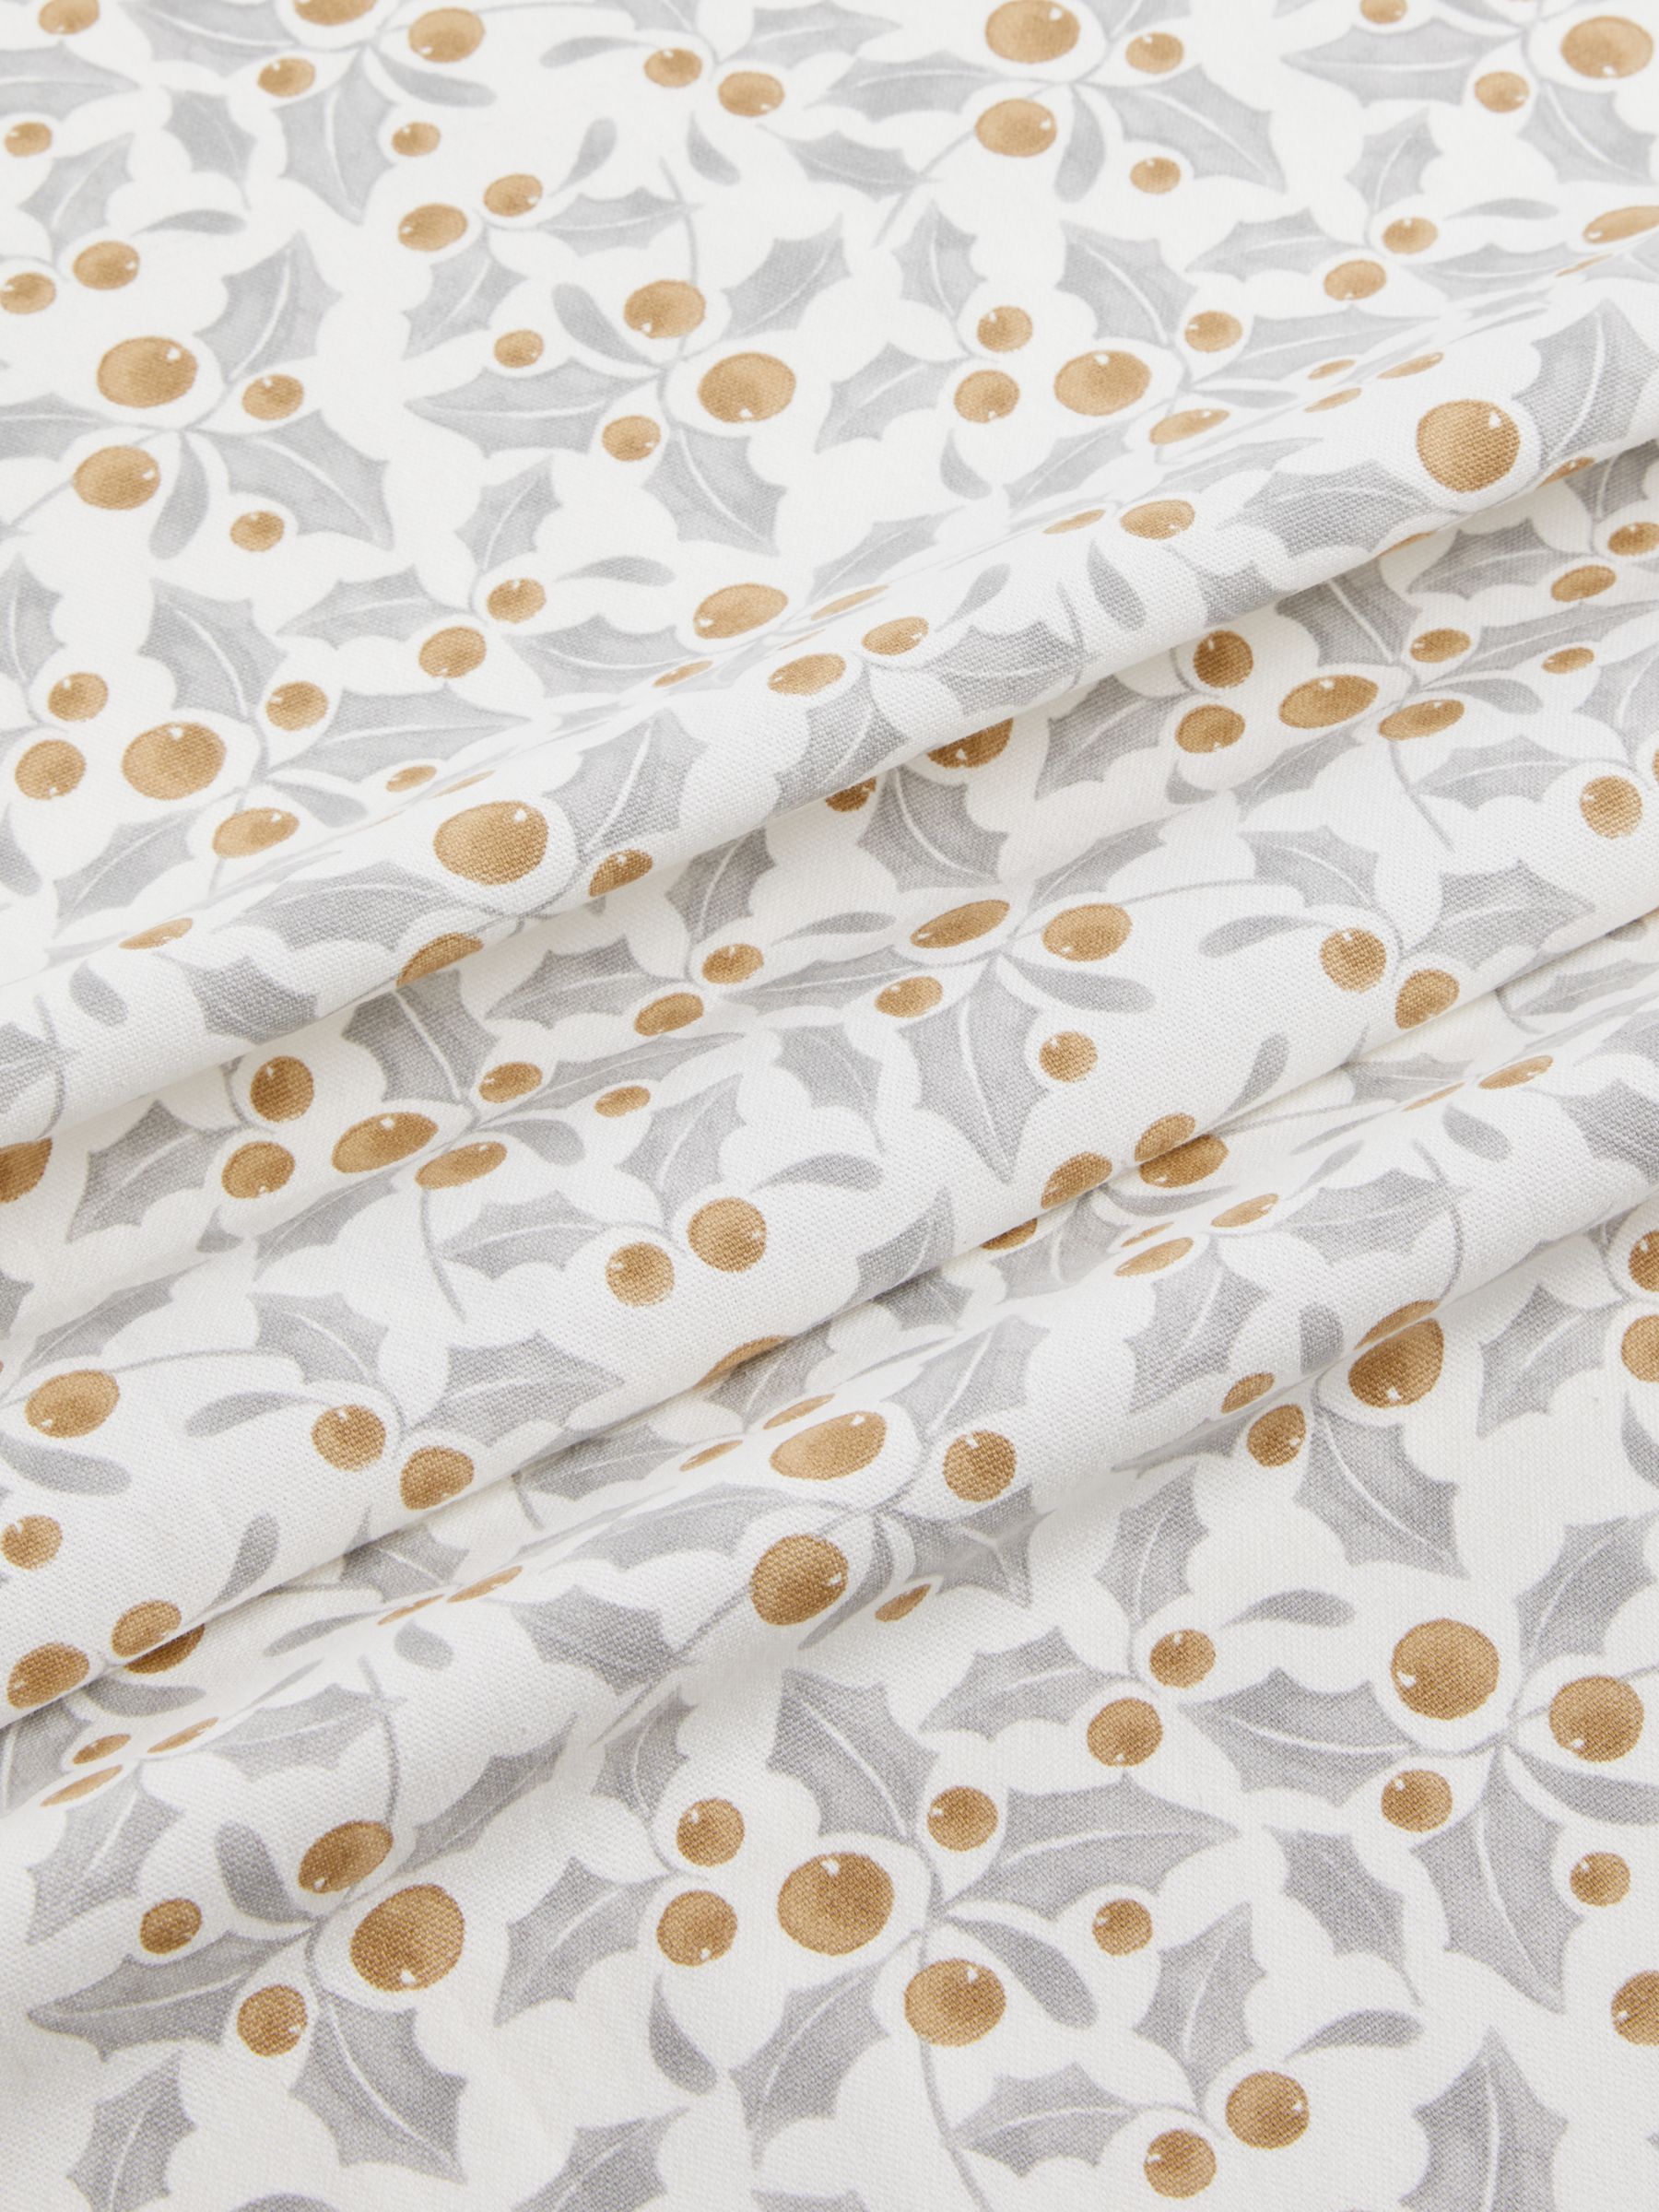 John Lewis Classic Holly PVC Tablecloth Fabric, Silver/Gold